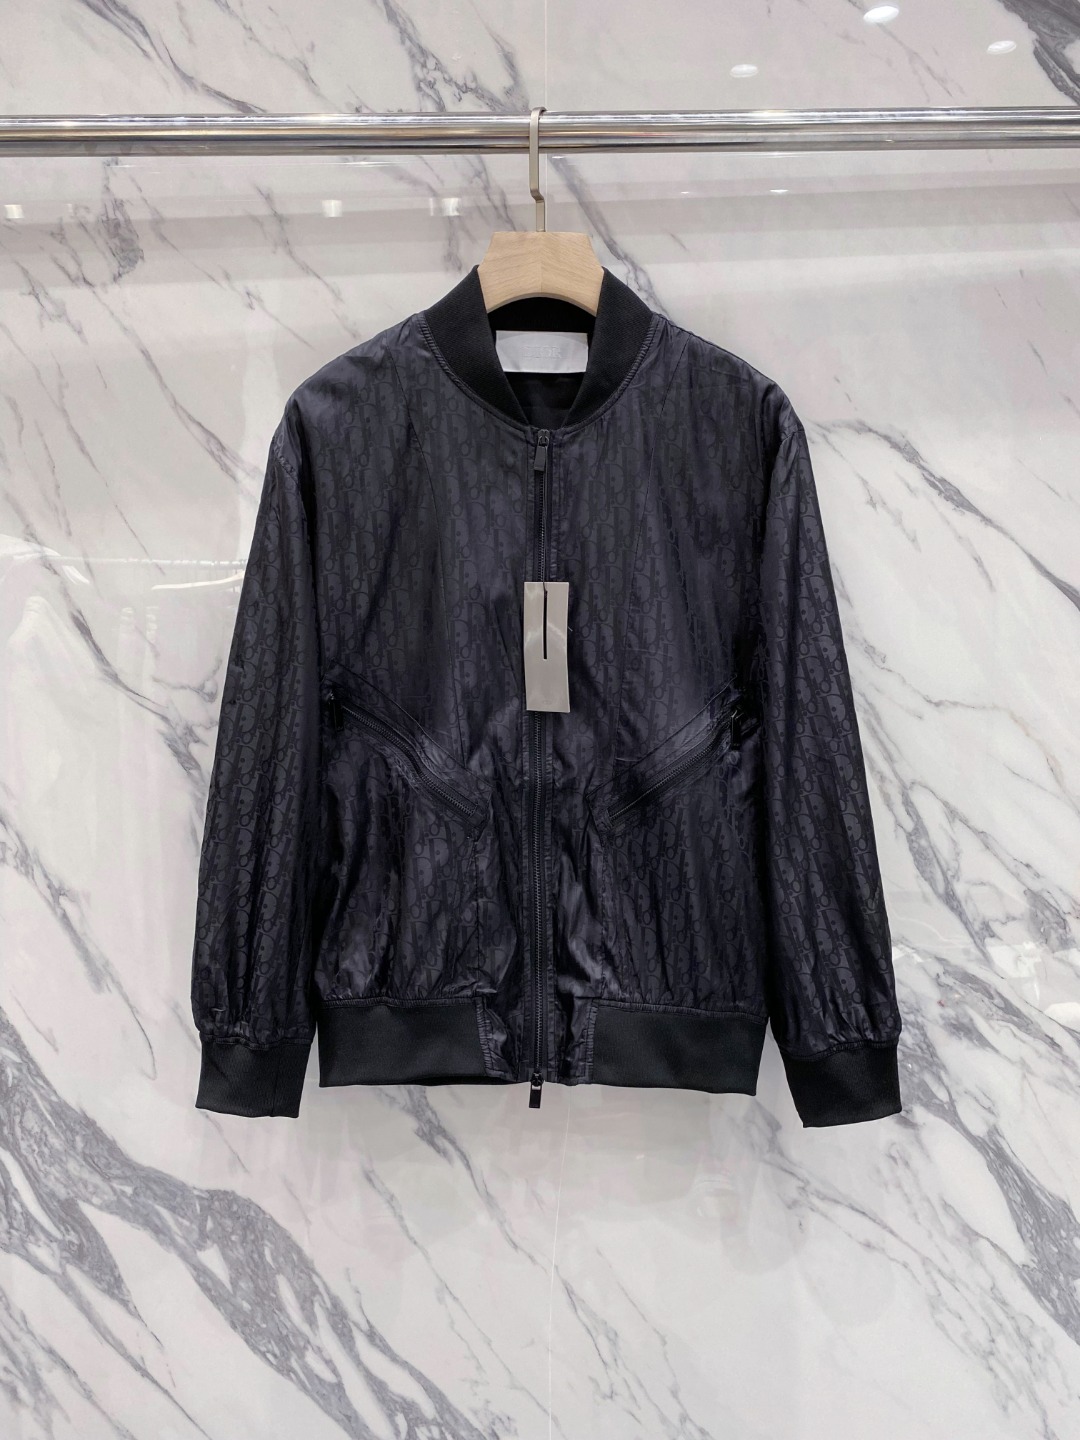 Dior Clothing Coats & Jackets Fall/Winter Collection Fashion